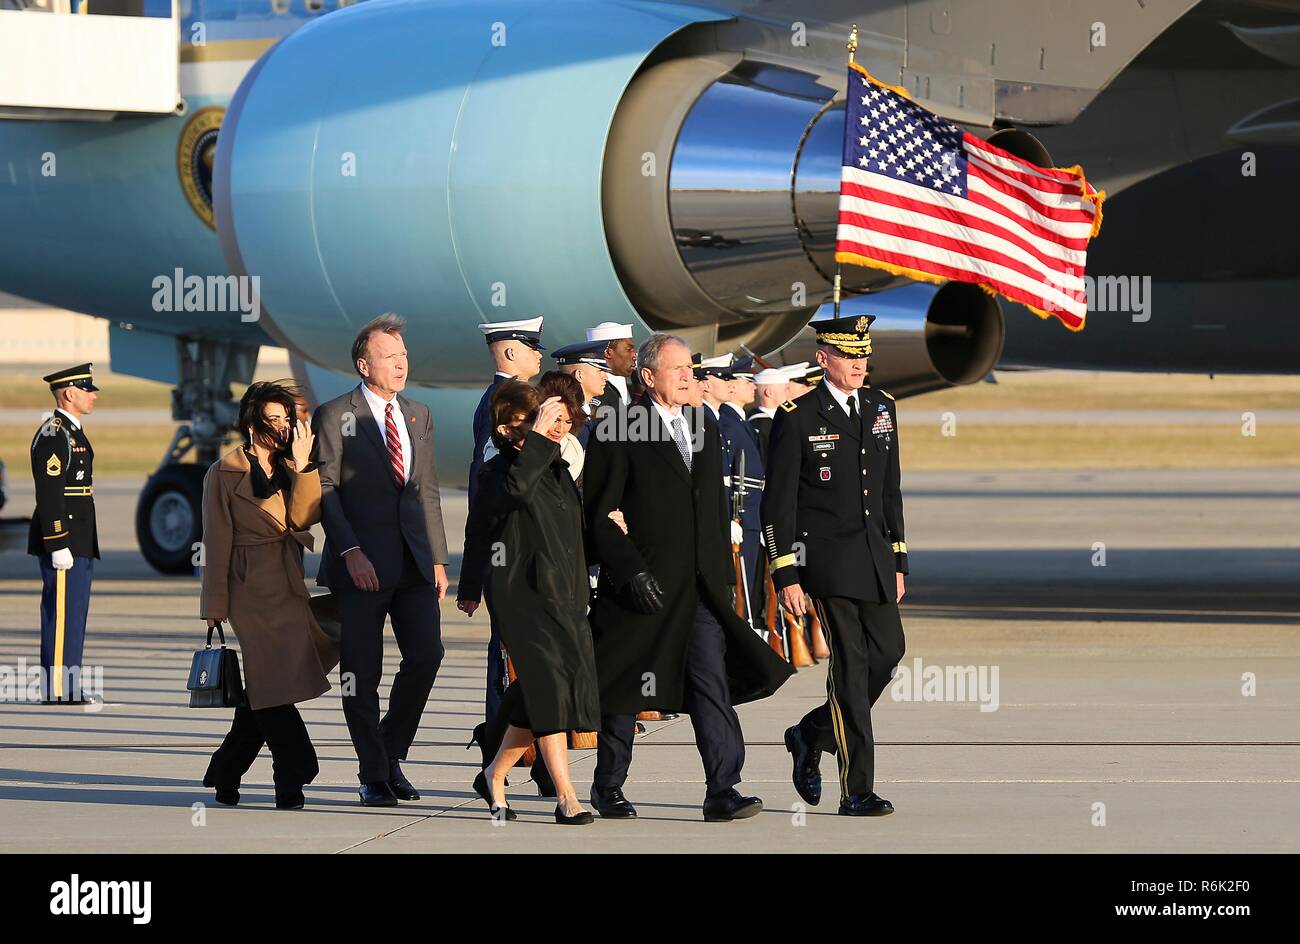 Former President George W. Bush, right, and First Lady Laura Bush, center, and members of the Bush family arrive from Houston with the the flag-draped casket of his father, former president George H.W. Bush aboard Air Force One December 3, 2018 in Andrews, Maryland. Bush, the 41st President, died in his Houston home at age 94. Stock Photo